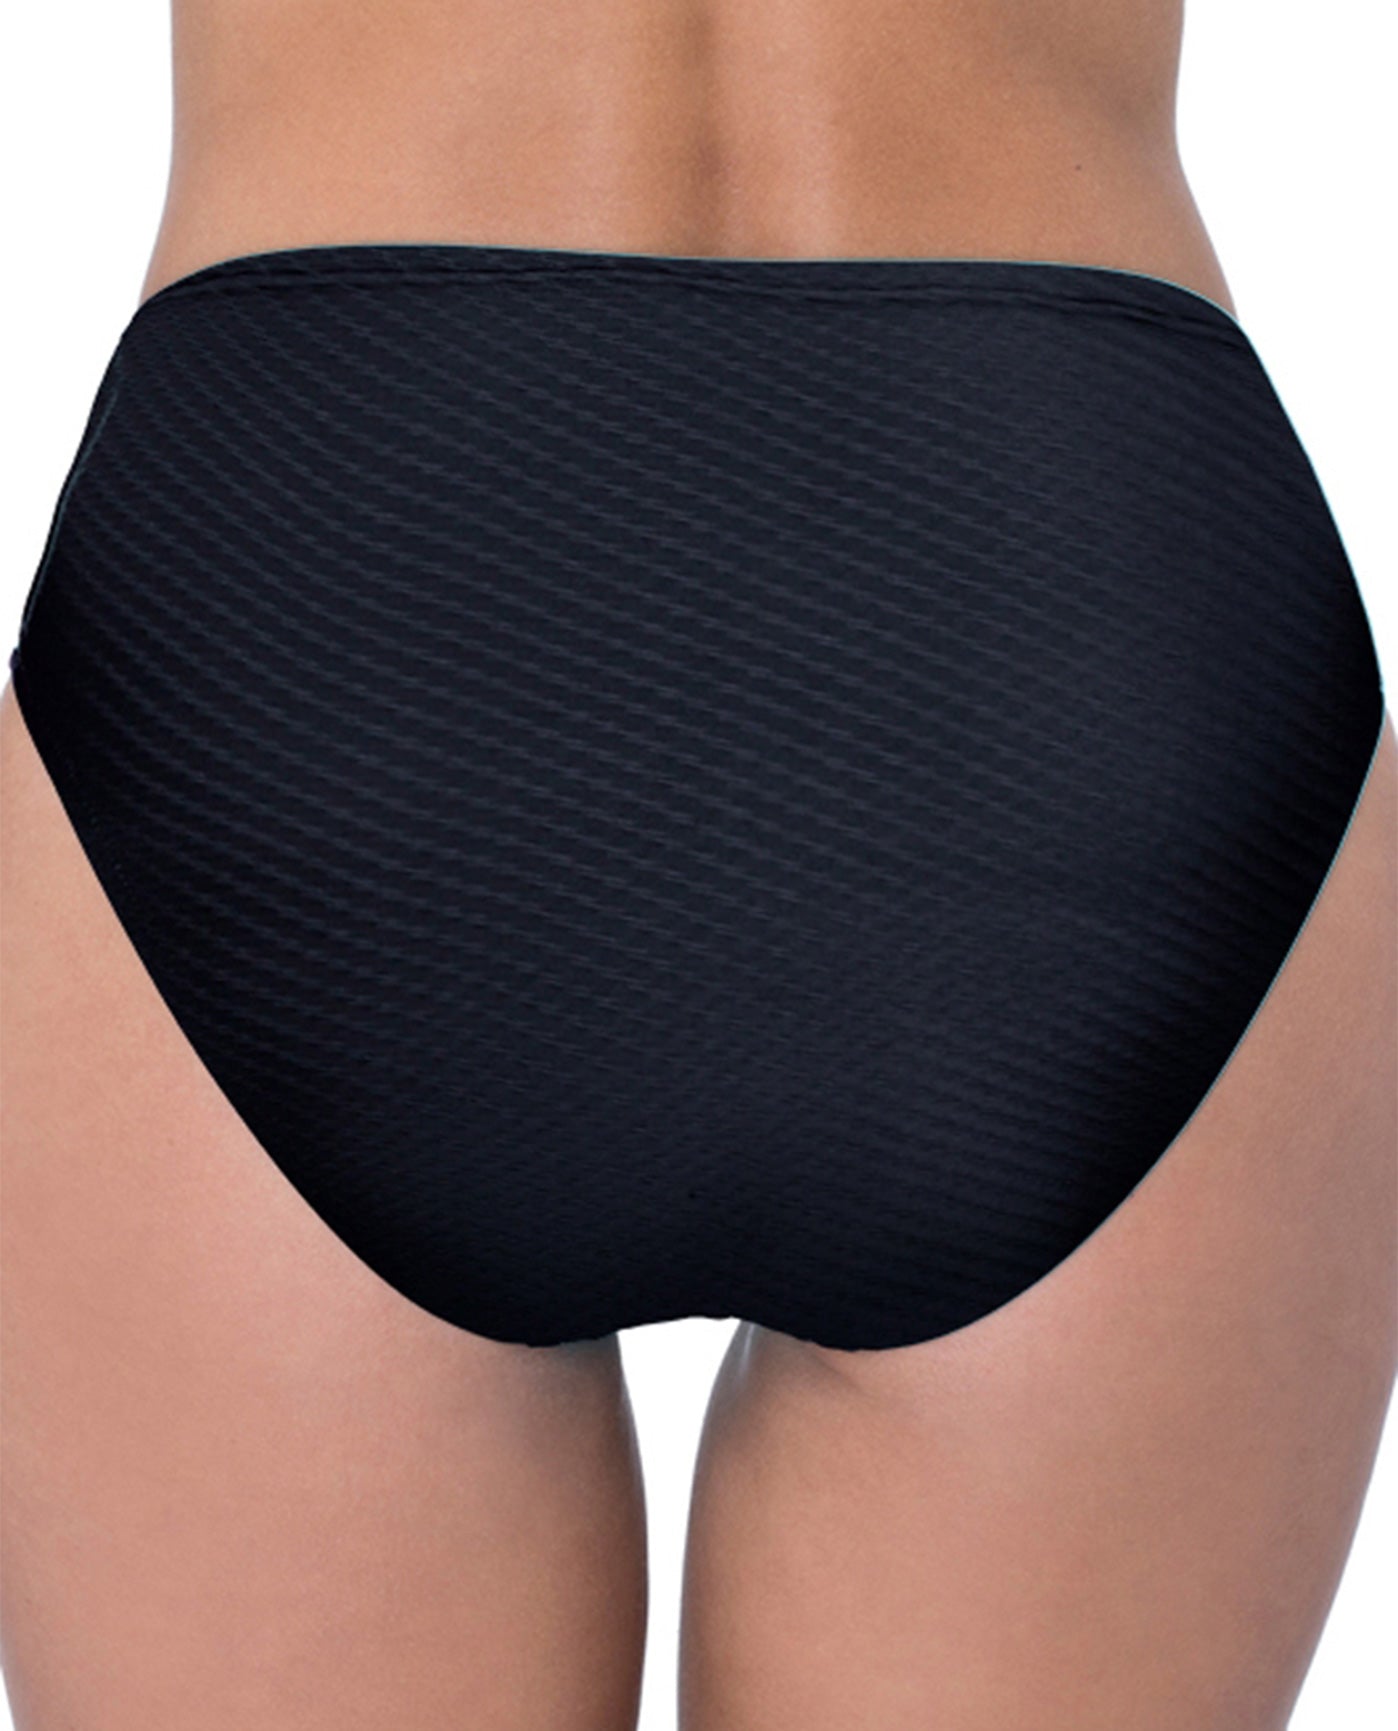 Back View Of Profile by Gottex Ribbons Textured Seamless Tankini Bottom | PRO RIBBONS BLACK